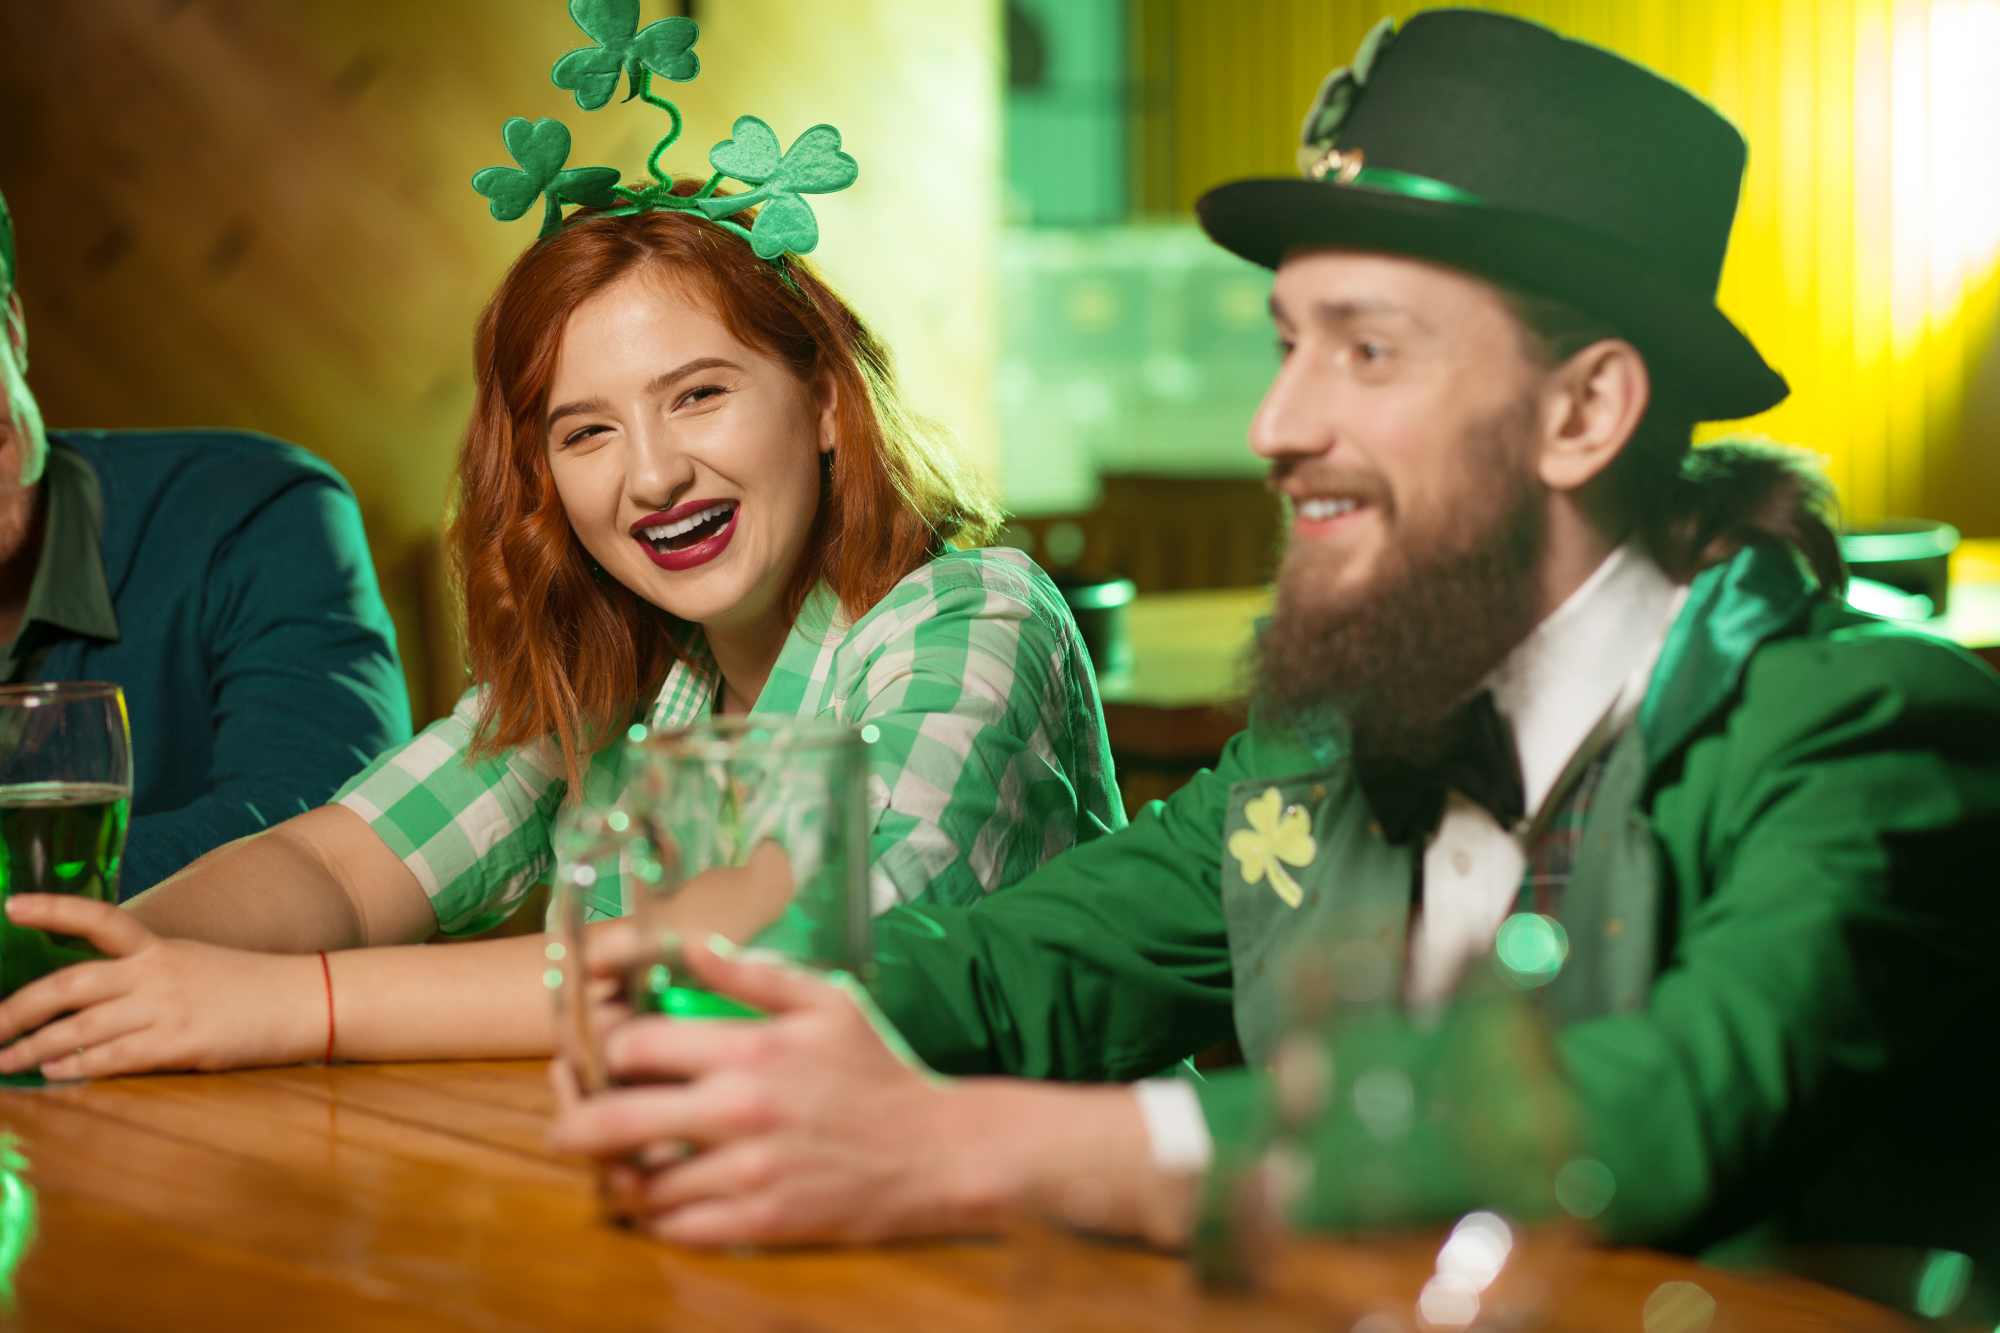 people dressed up for St Patrick's day at a bar